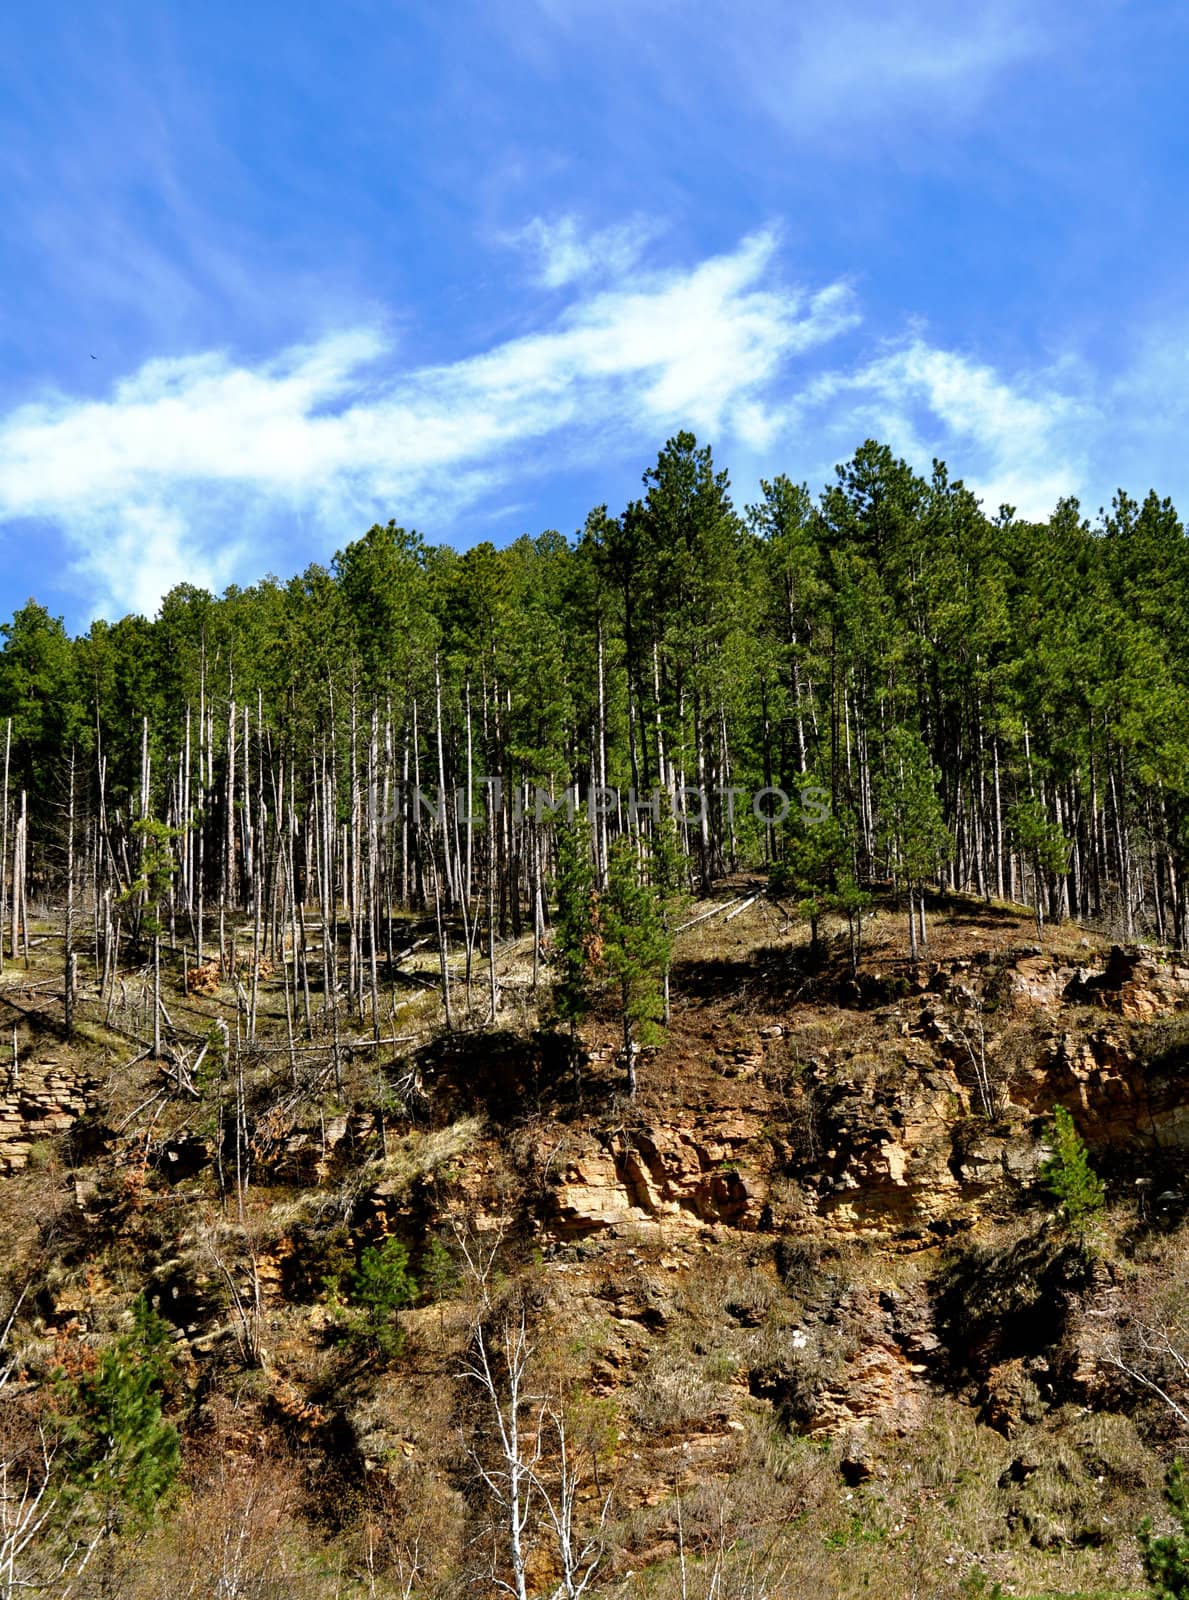 Deadwood Trees on a hill by RefocusPhoto